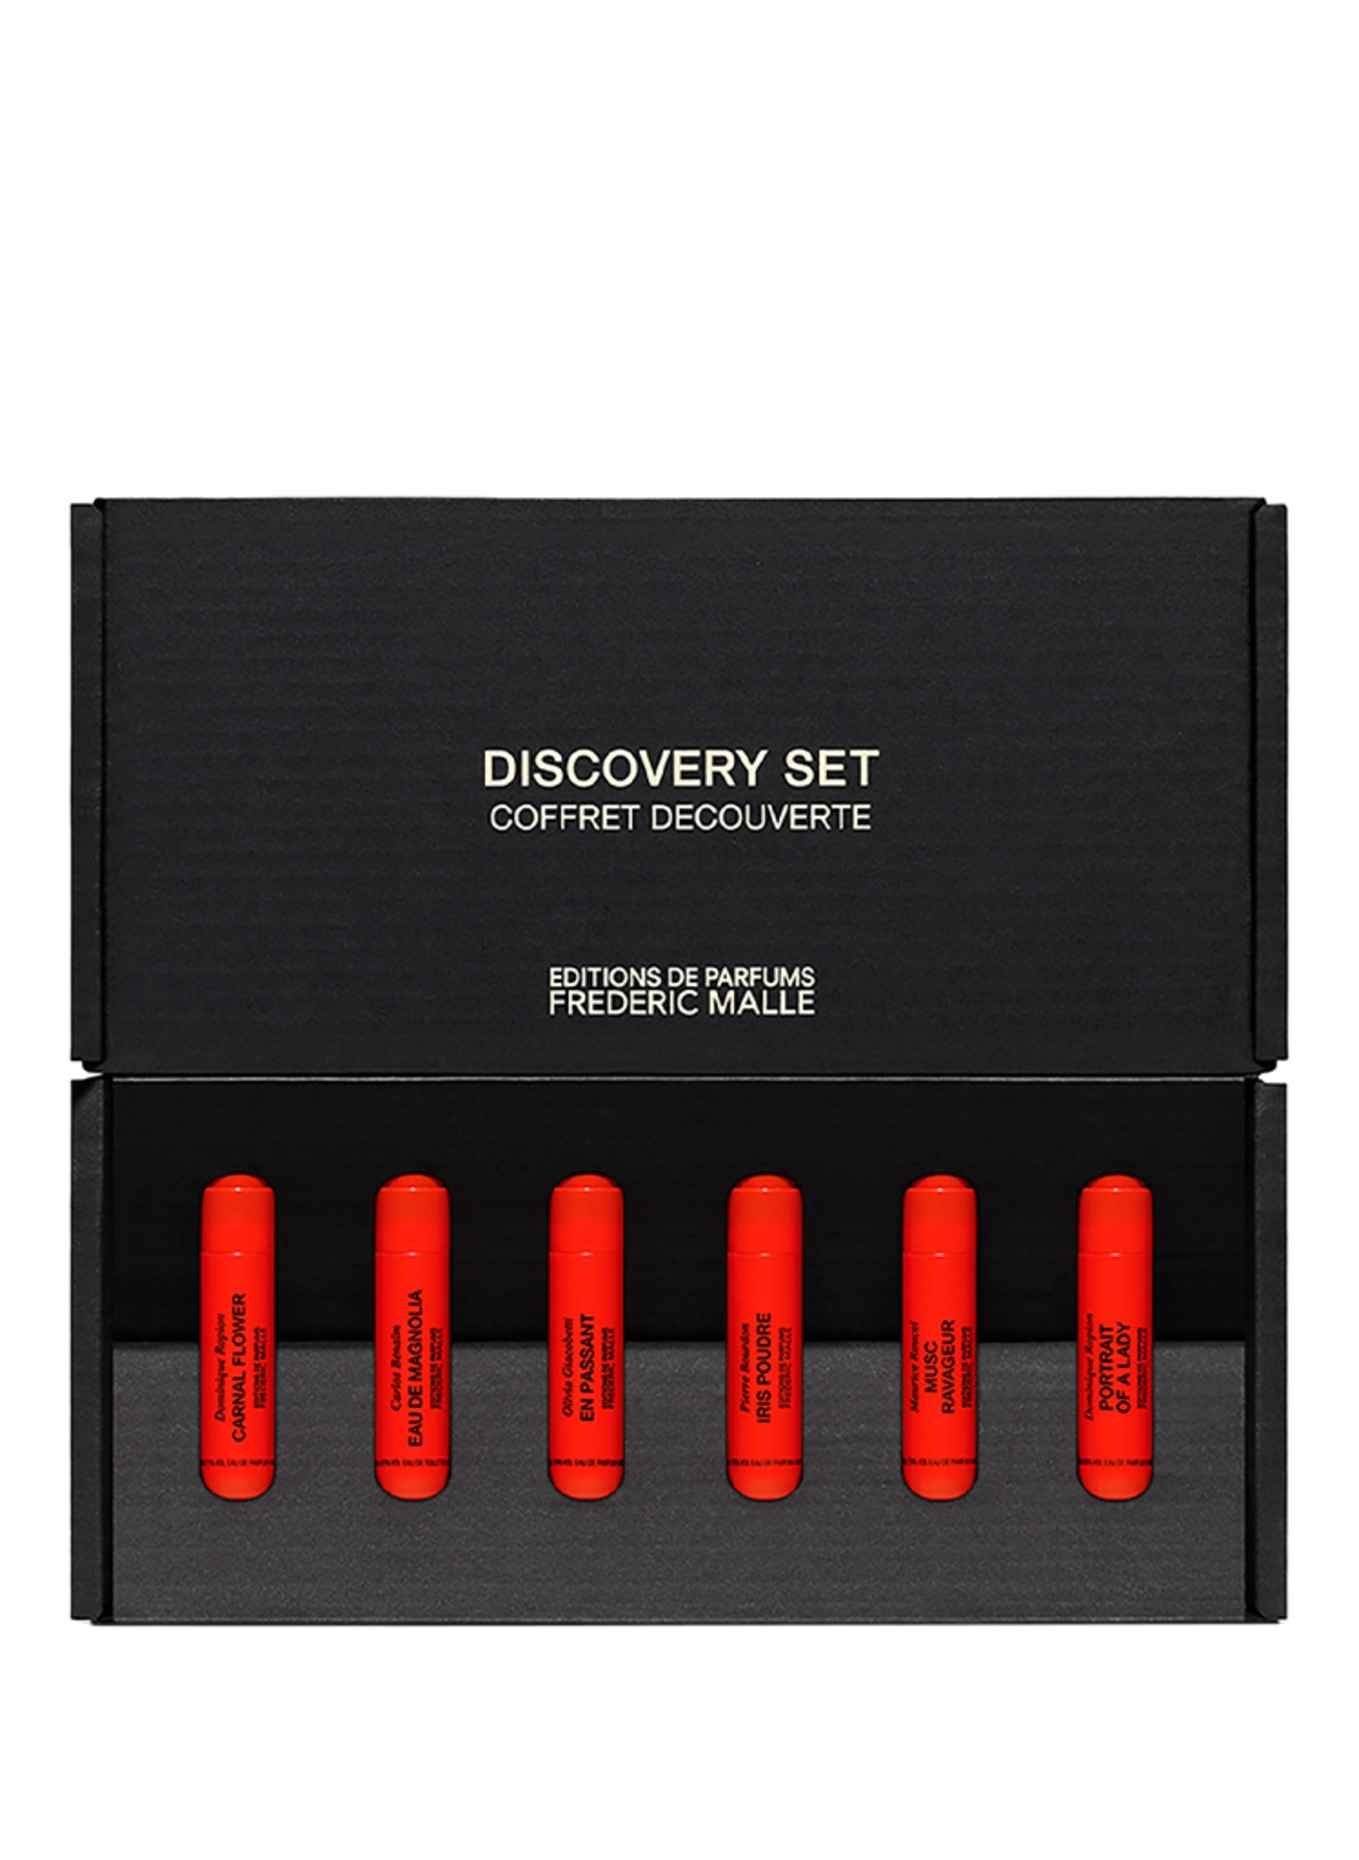 EDITIONS DE PARFUMS FREDERIC MALLE DISCOVERY SET - FOR HER (Obrázek 1)